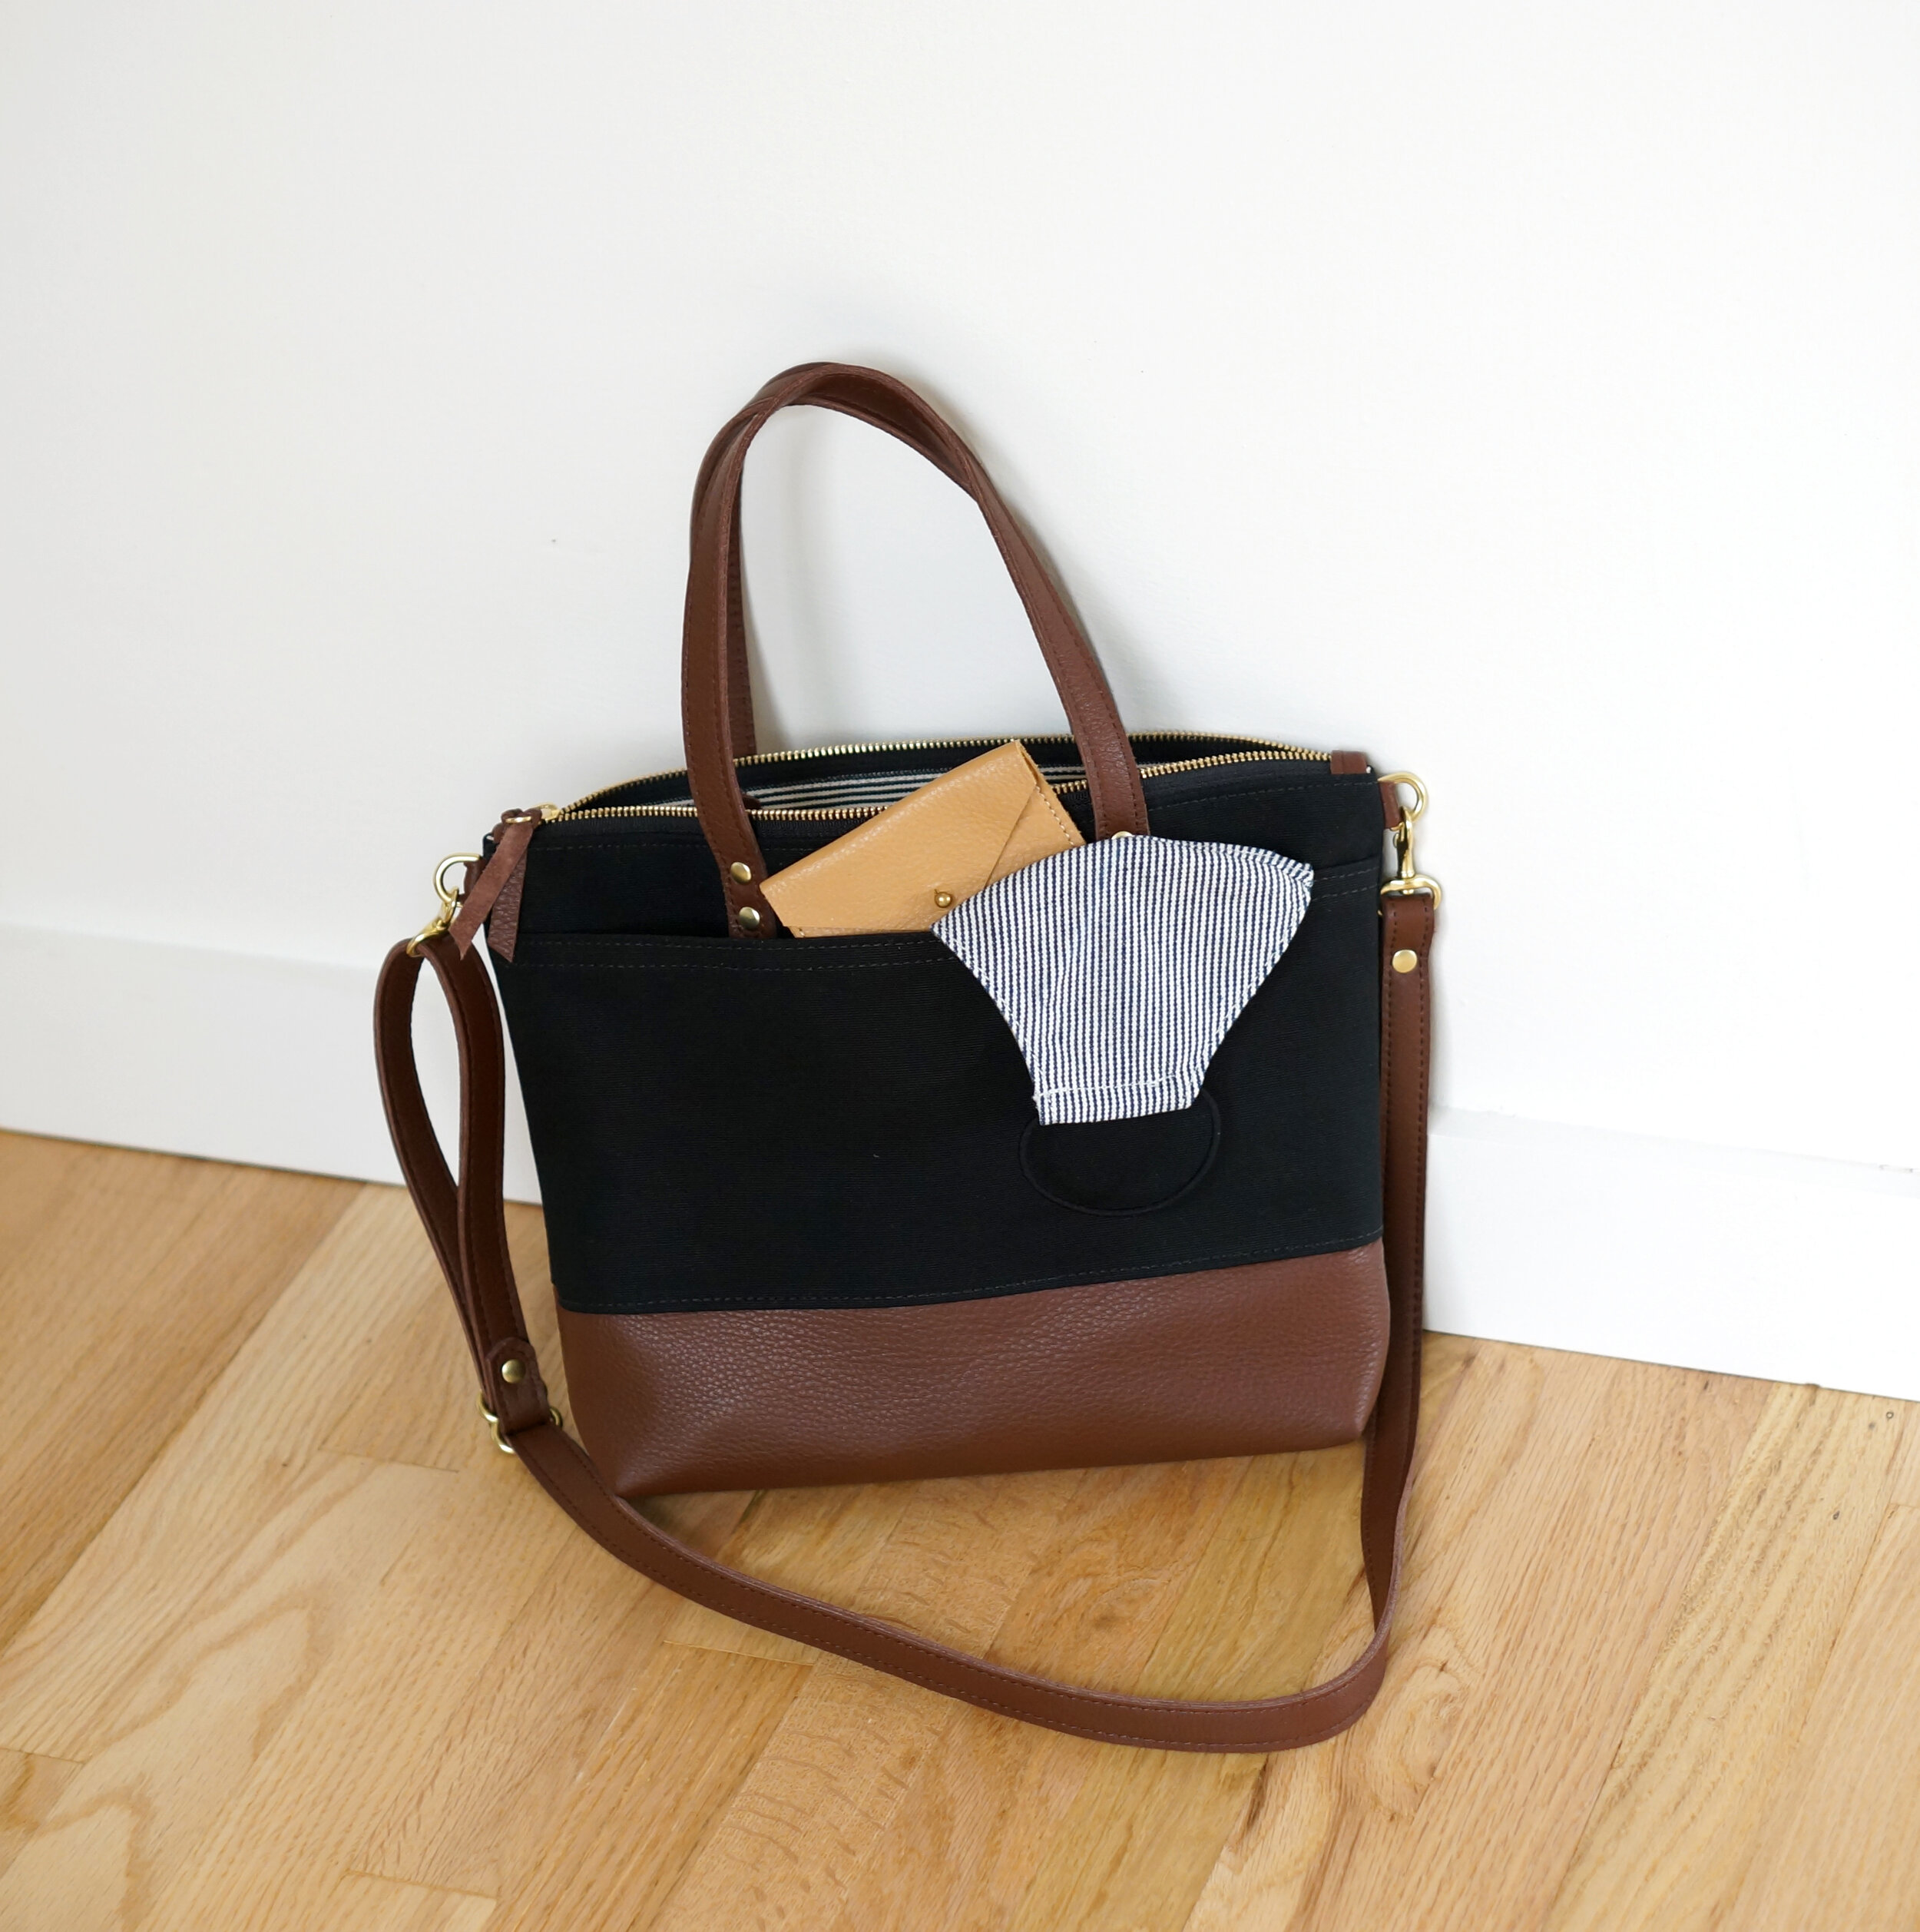 Umbrella Collective, Leather Bags, Leather Goods, Handmade in Portland,  Oregon-Travel Tote